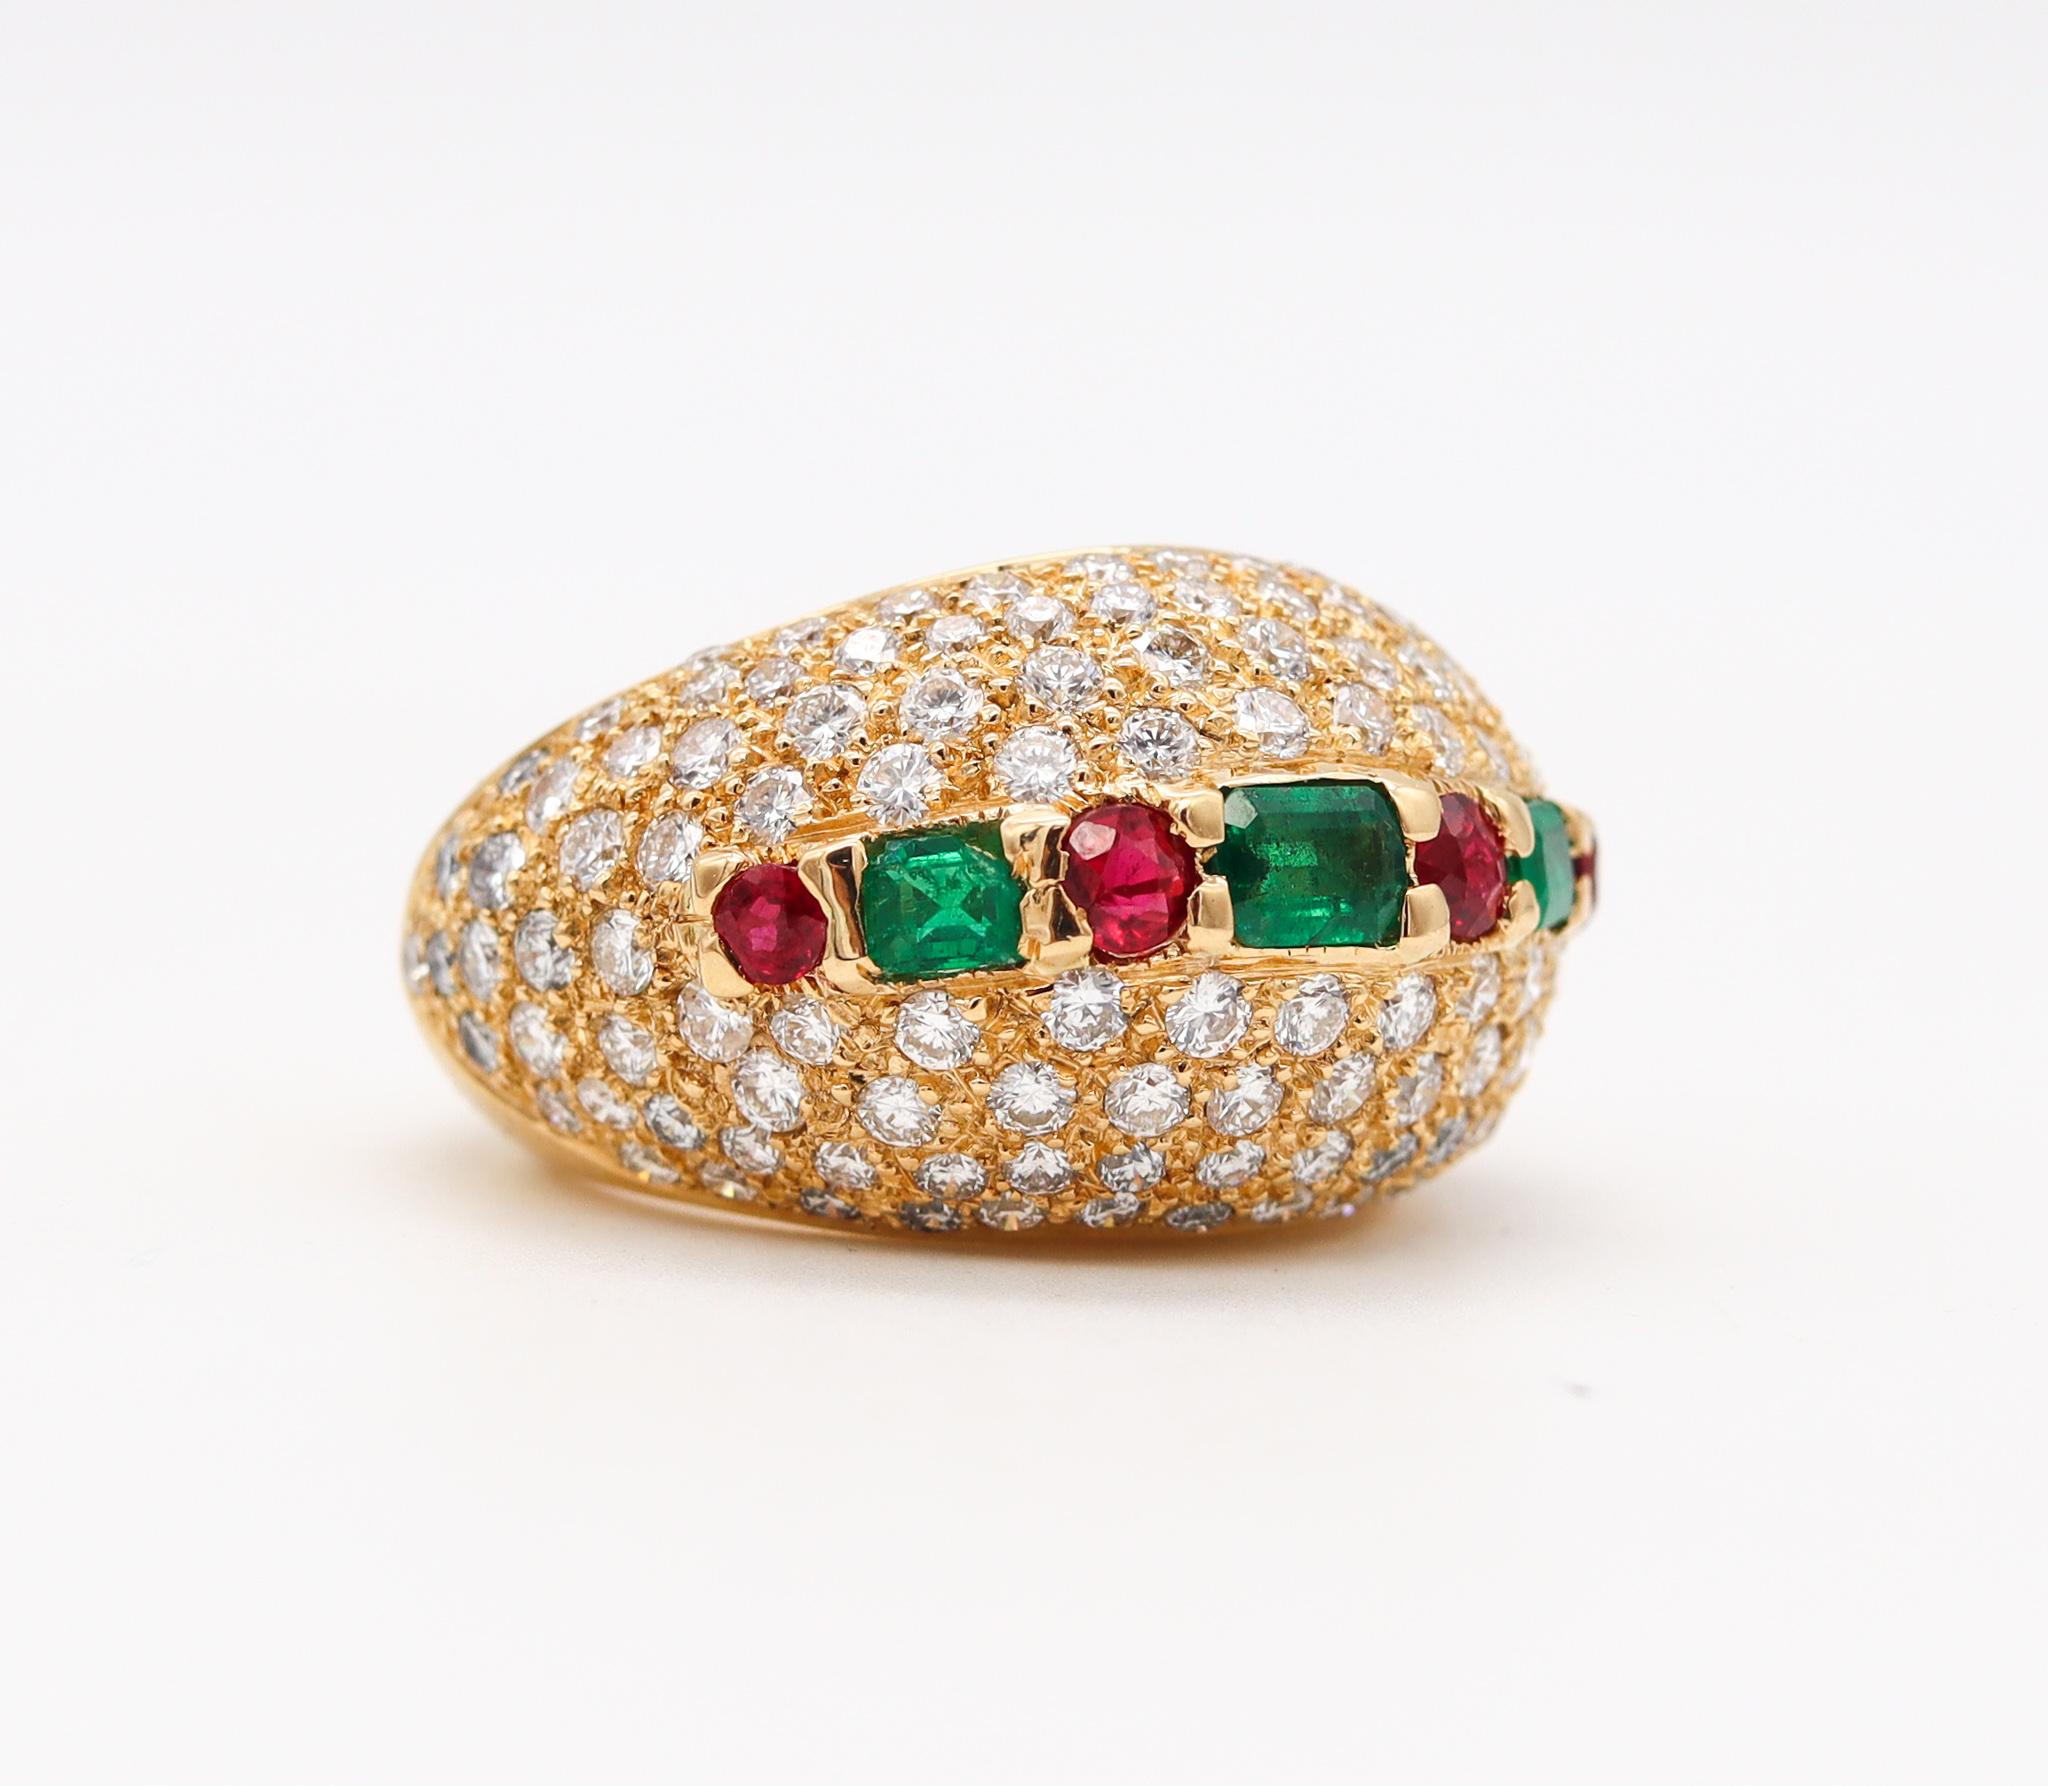 French Modern Cocktail Ring in 18Kt Gold with 7.32 Cts Diamonds Emerald Rubies 2